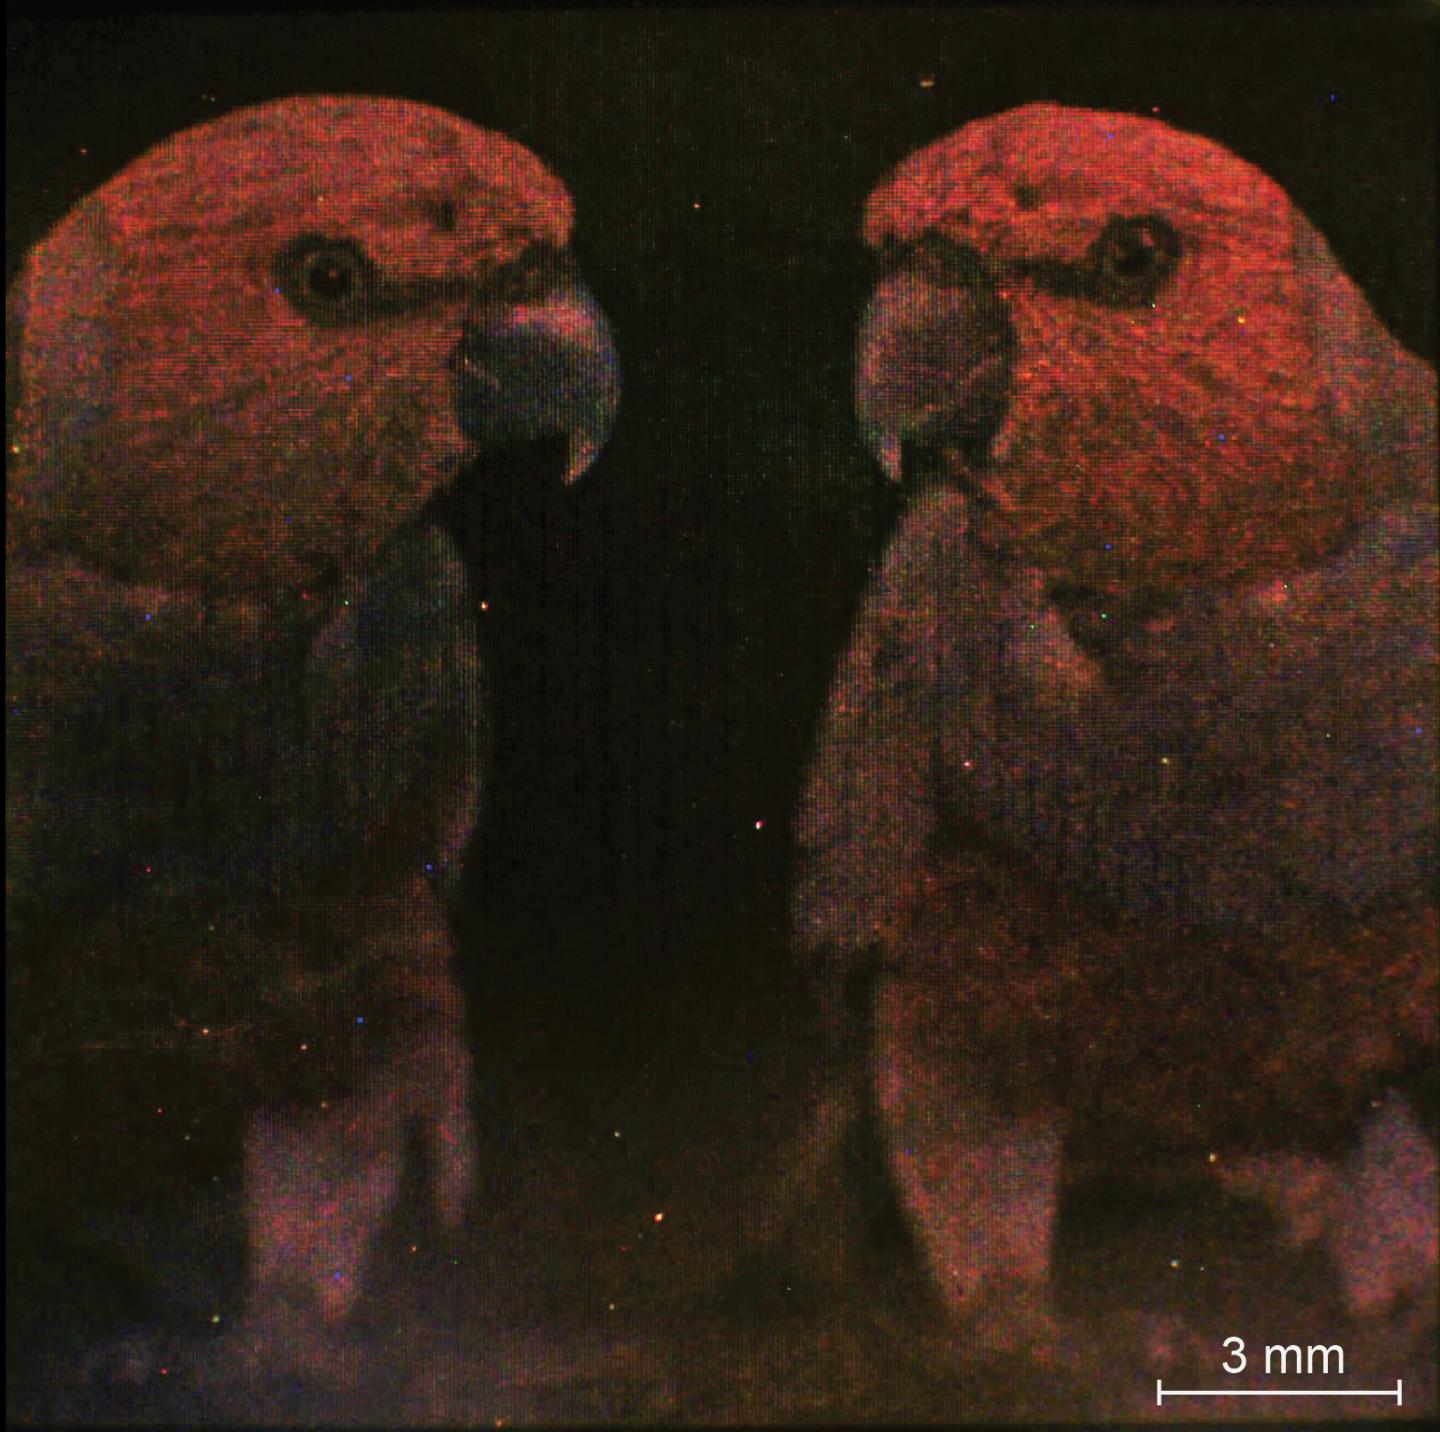 A closeup of the colorful parrot picture printed on a thin gold wafer using the new nanocube-based technology